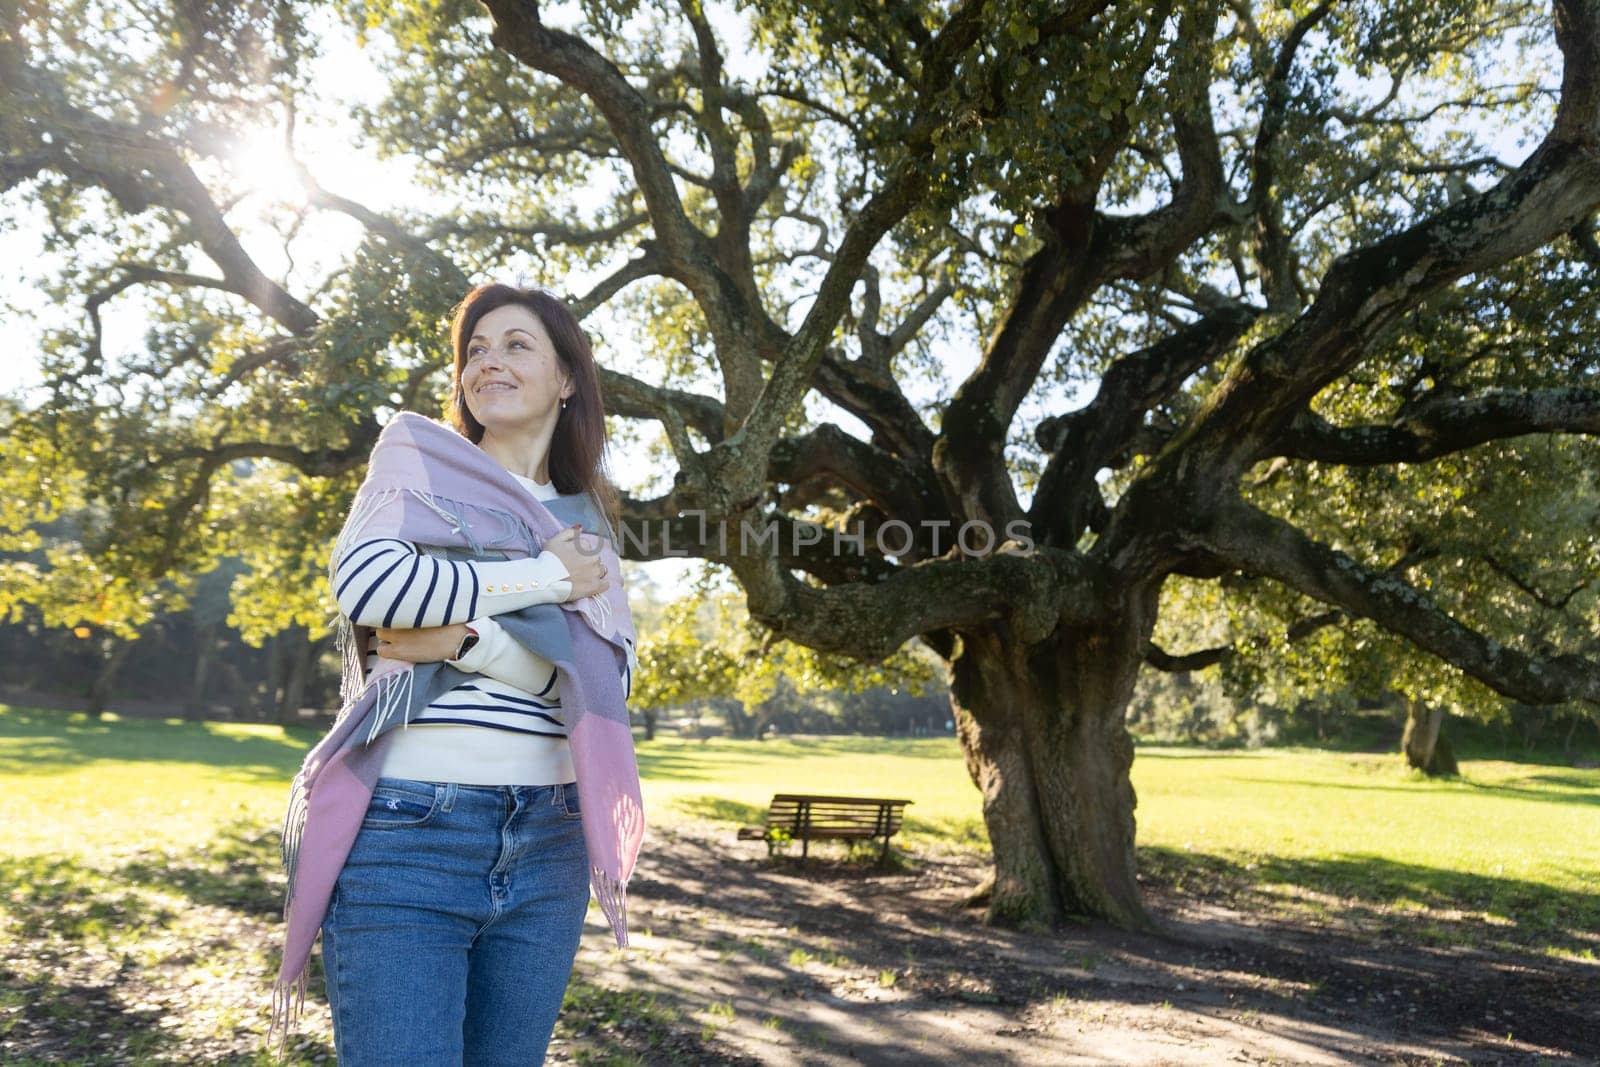 A woman is standing in a park, wearing a scarf and a white shirt. She is smiling and looking up at the sky. The park is filled with trees, and there is a bench nearby